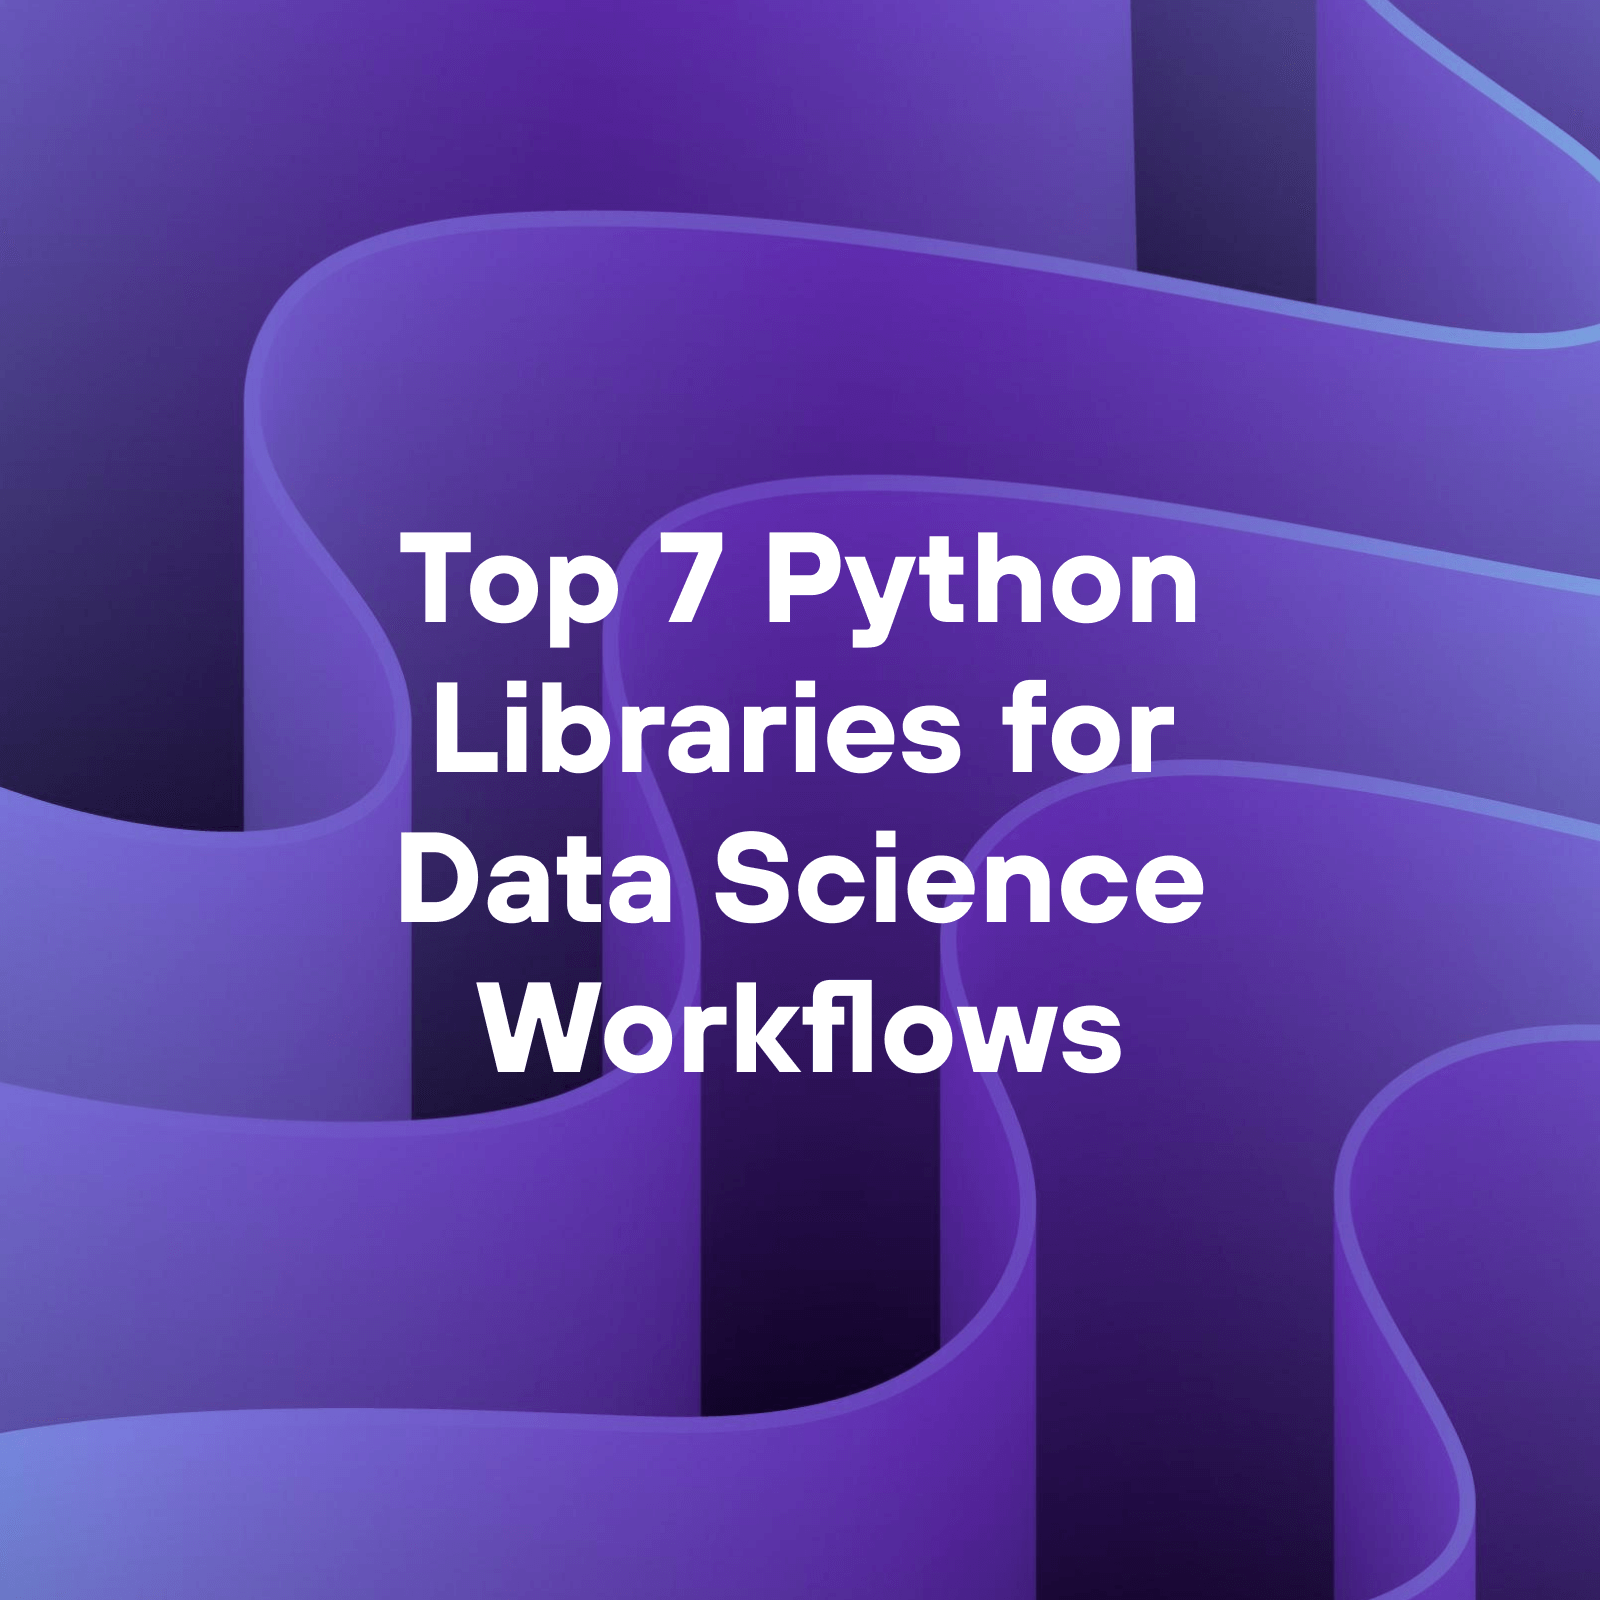 Top 7 Python Libraries for Data Science Workflows